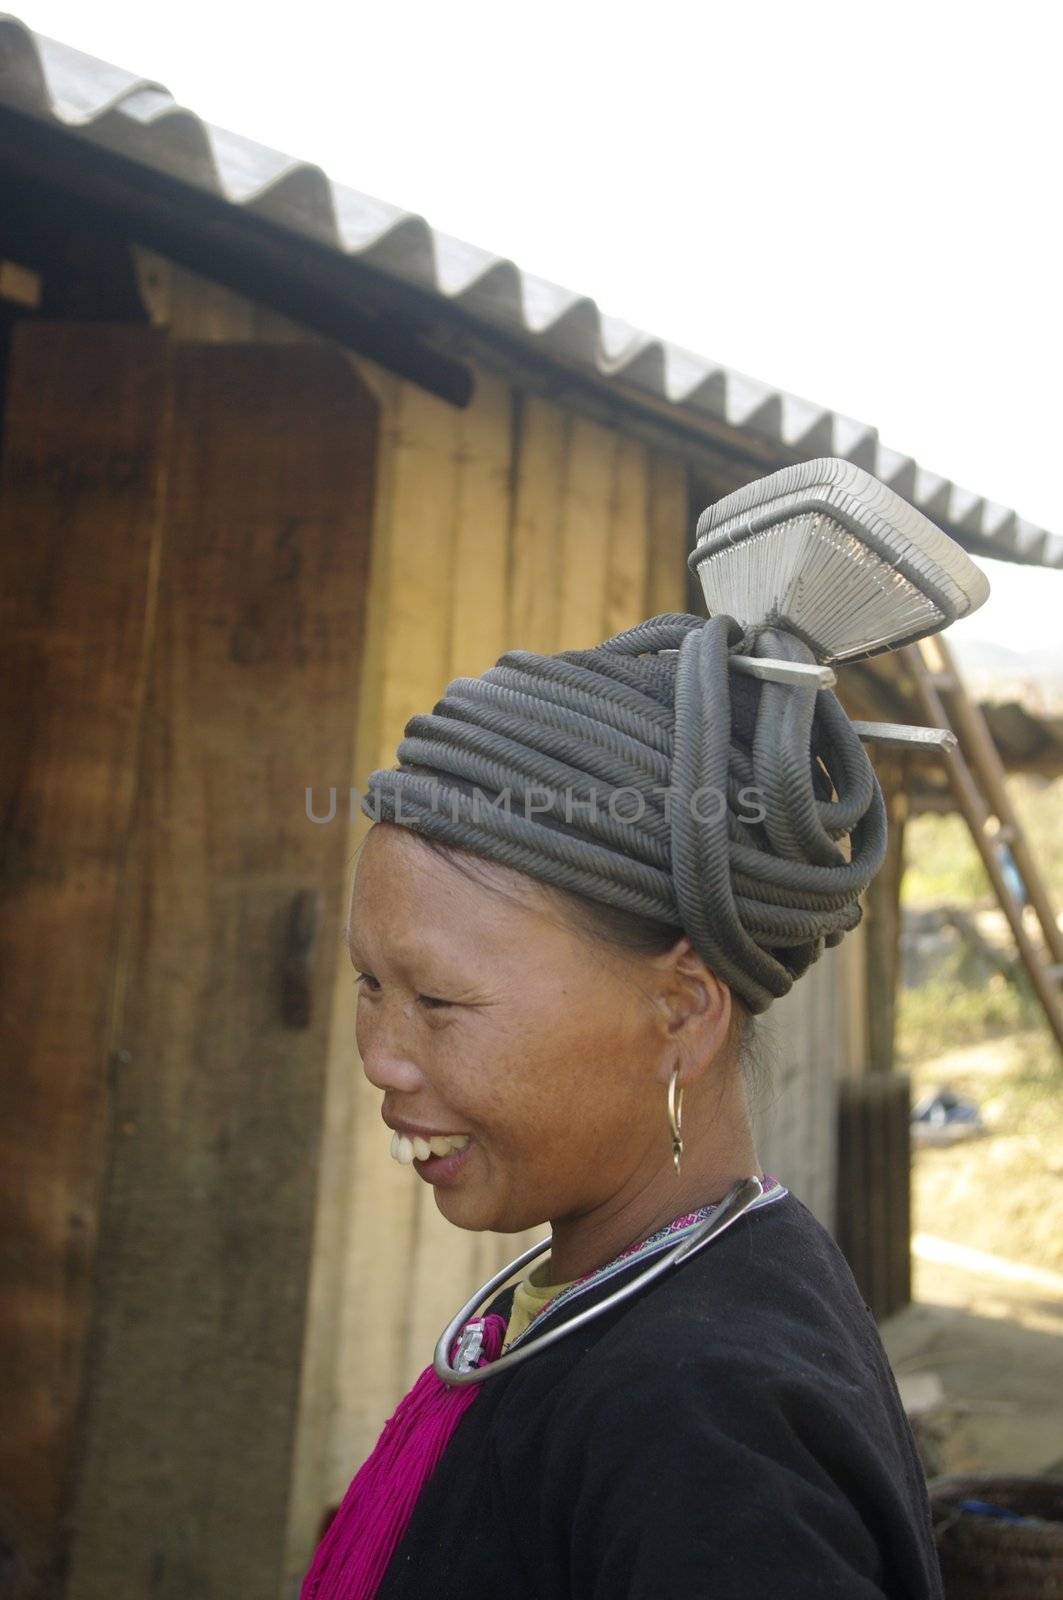 The Dao black ethnicity are widespread in northern Vietnam. But Dao Tien are unique because the women wear a shirt and black trousers, but above this cap so special. The cap is made of braided rope black head cap and It is surmounted by an inverted truncated pyramid hammered aluminum.